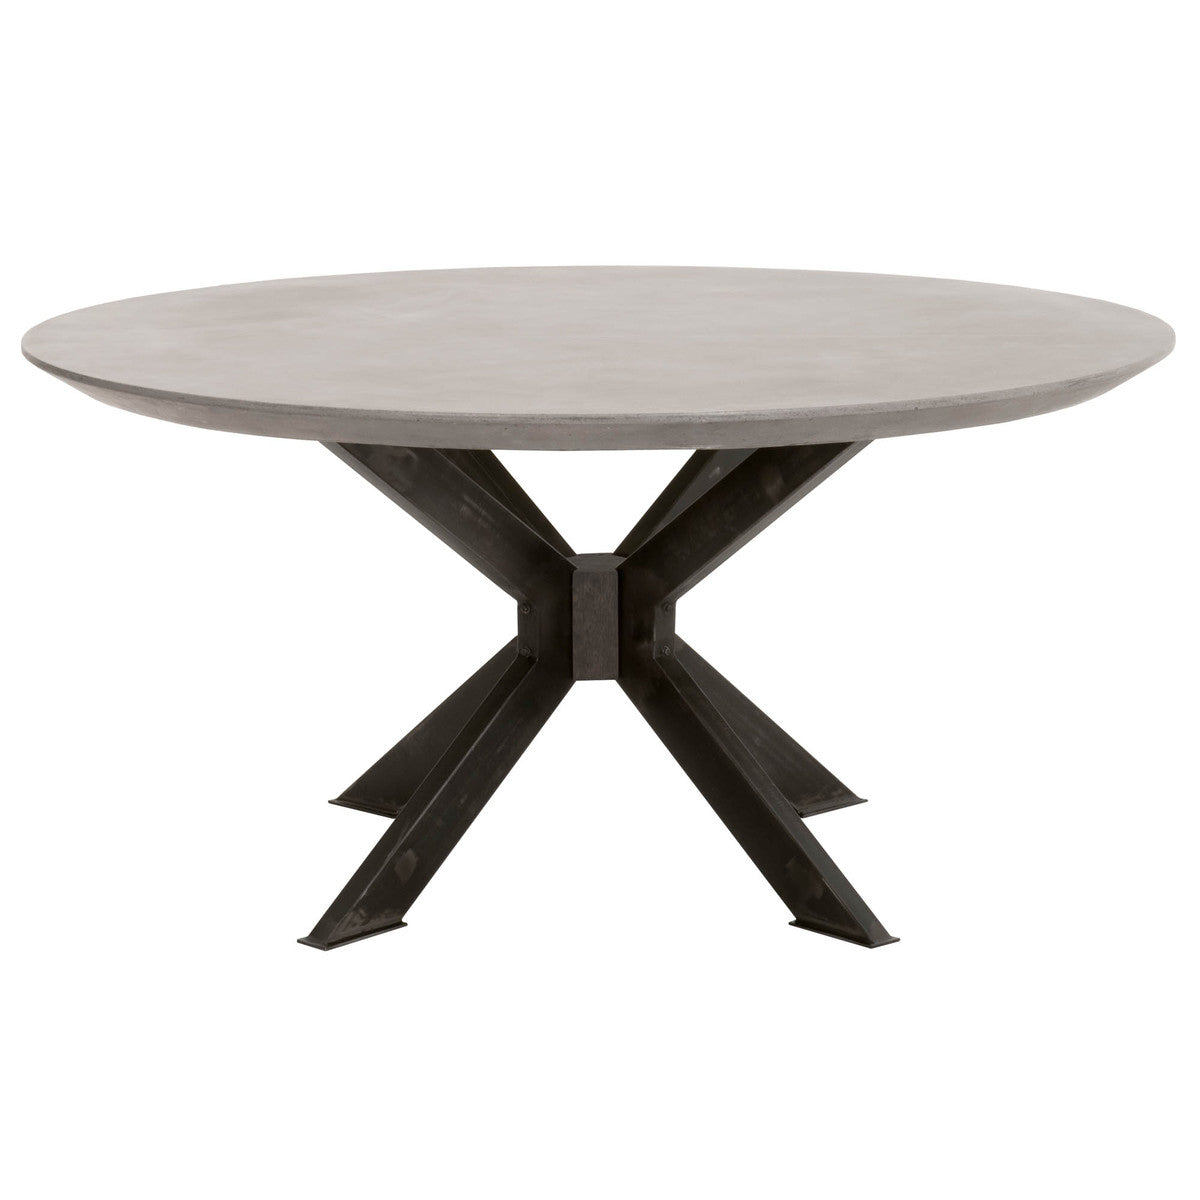 Knares Round Dining Table